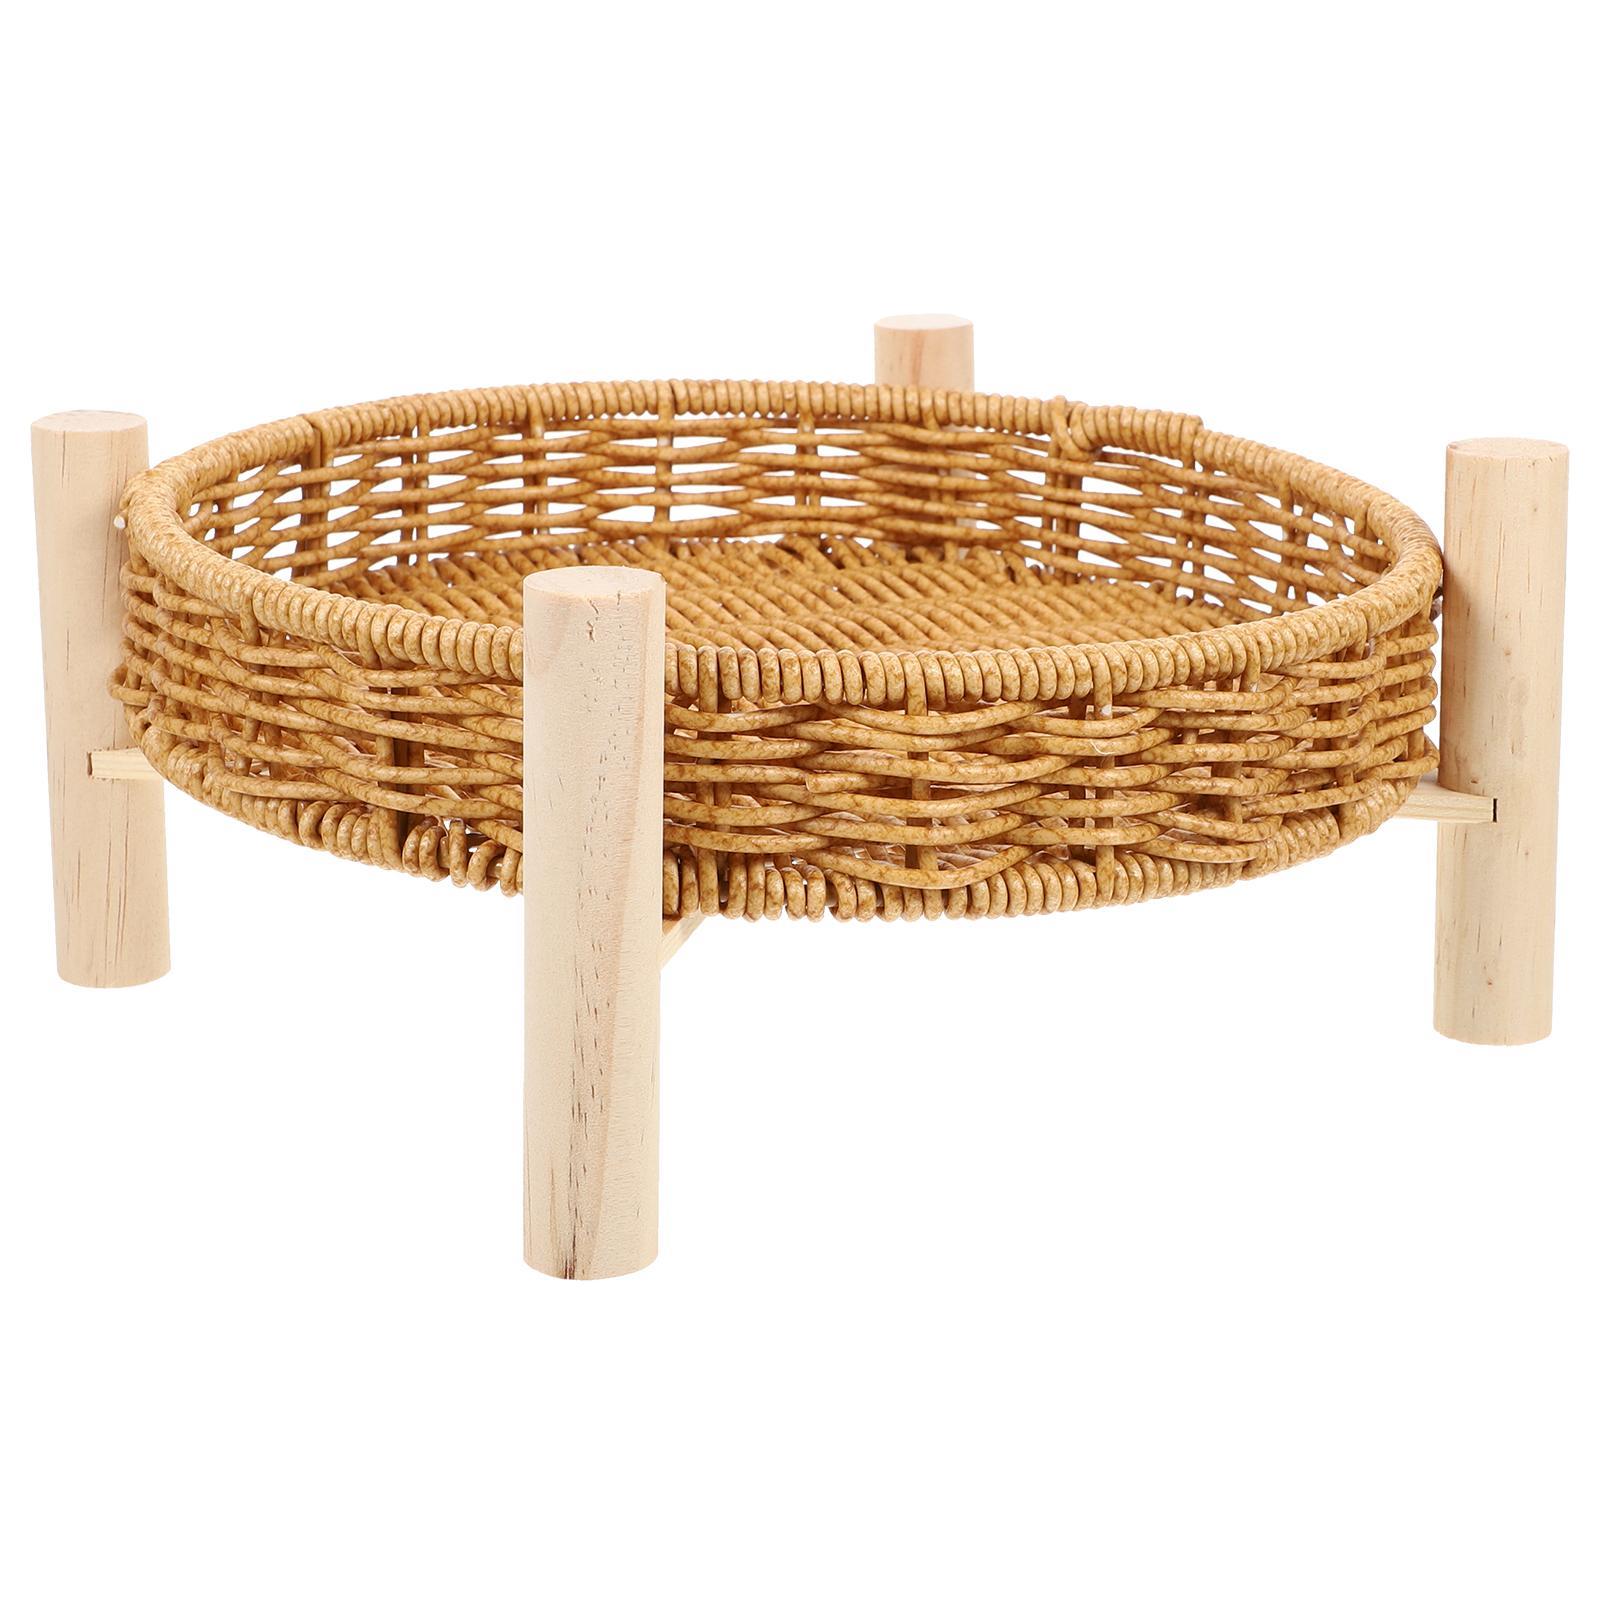 Bread Holder Imitation Rattan Fruit Bowl Food Container